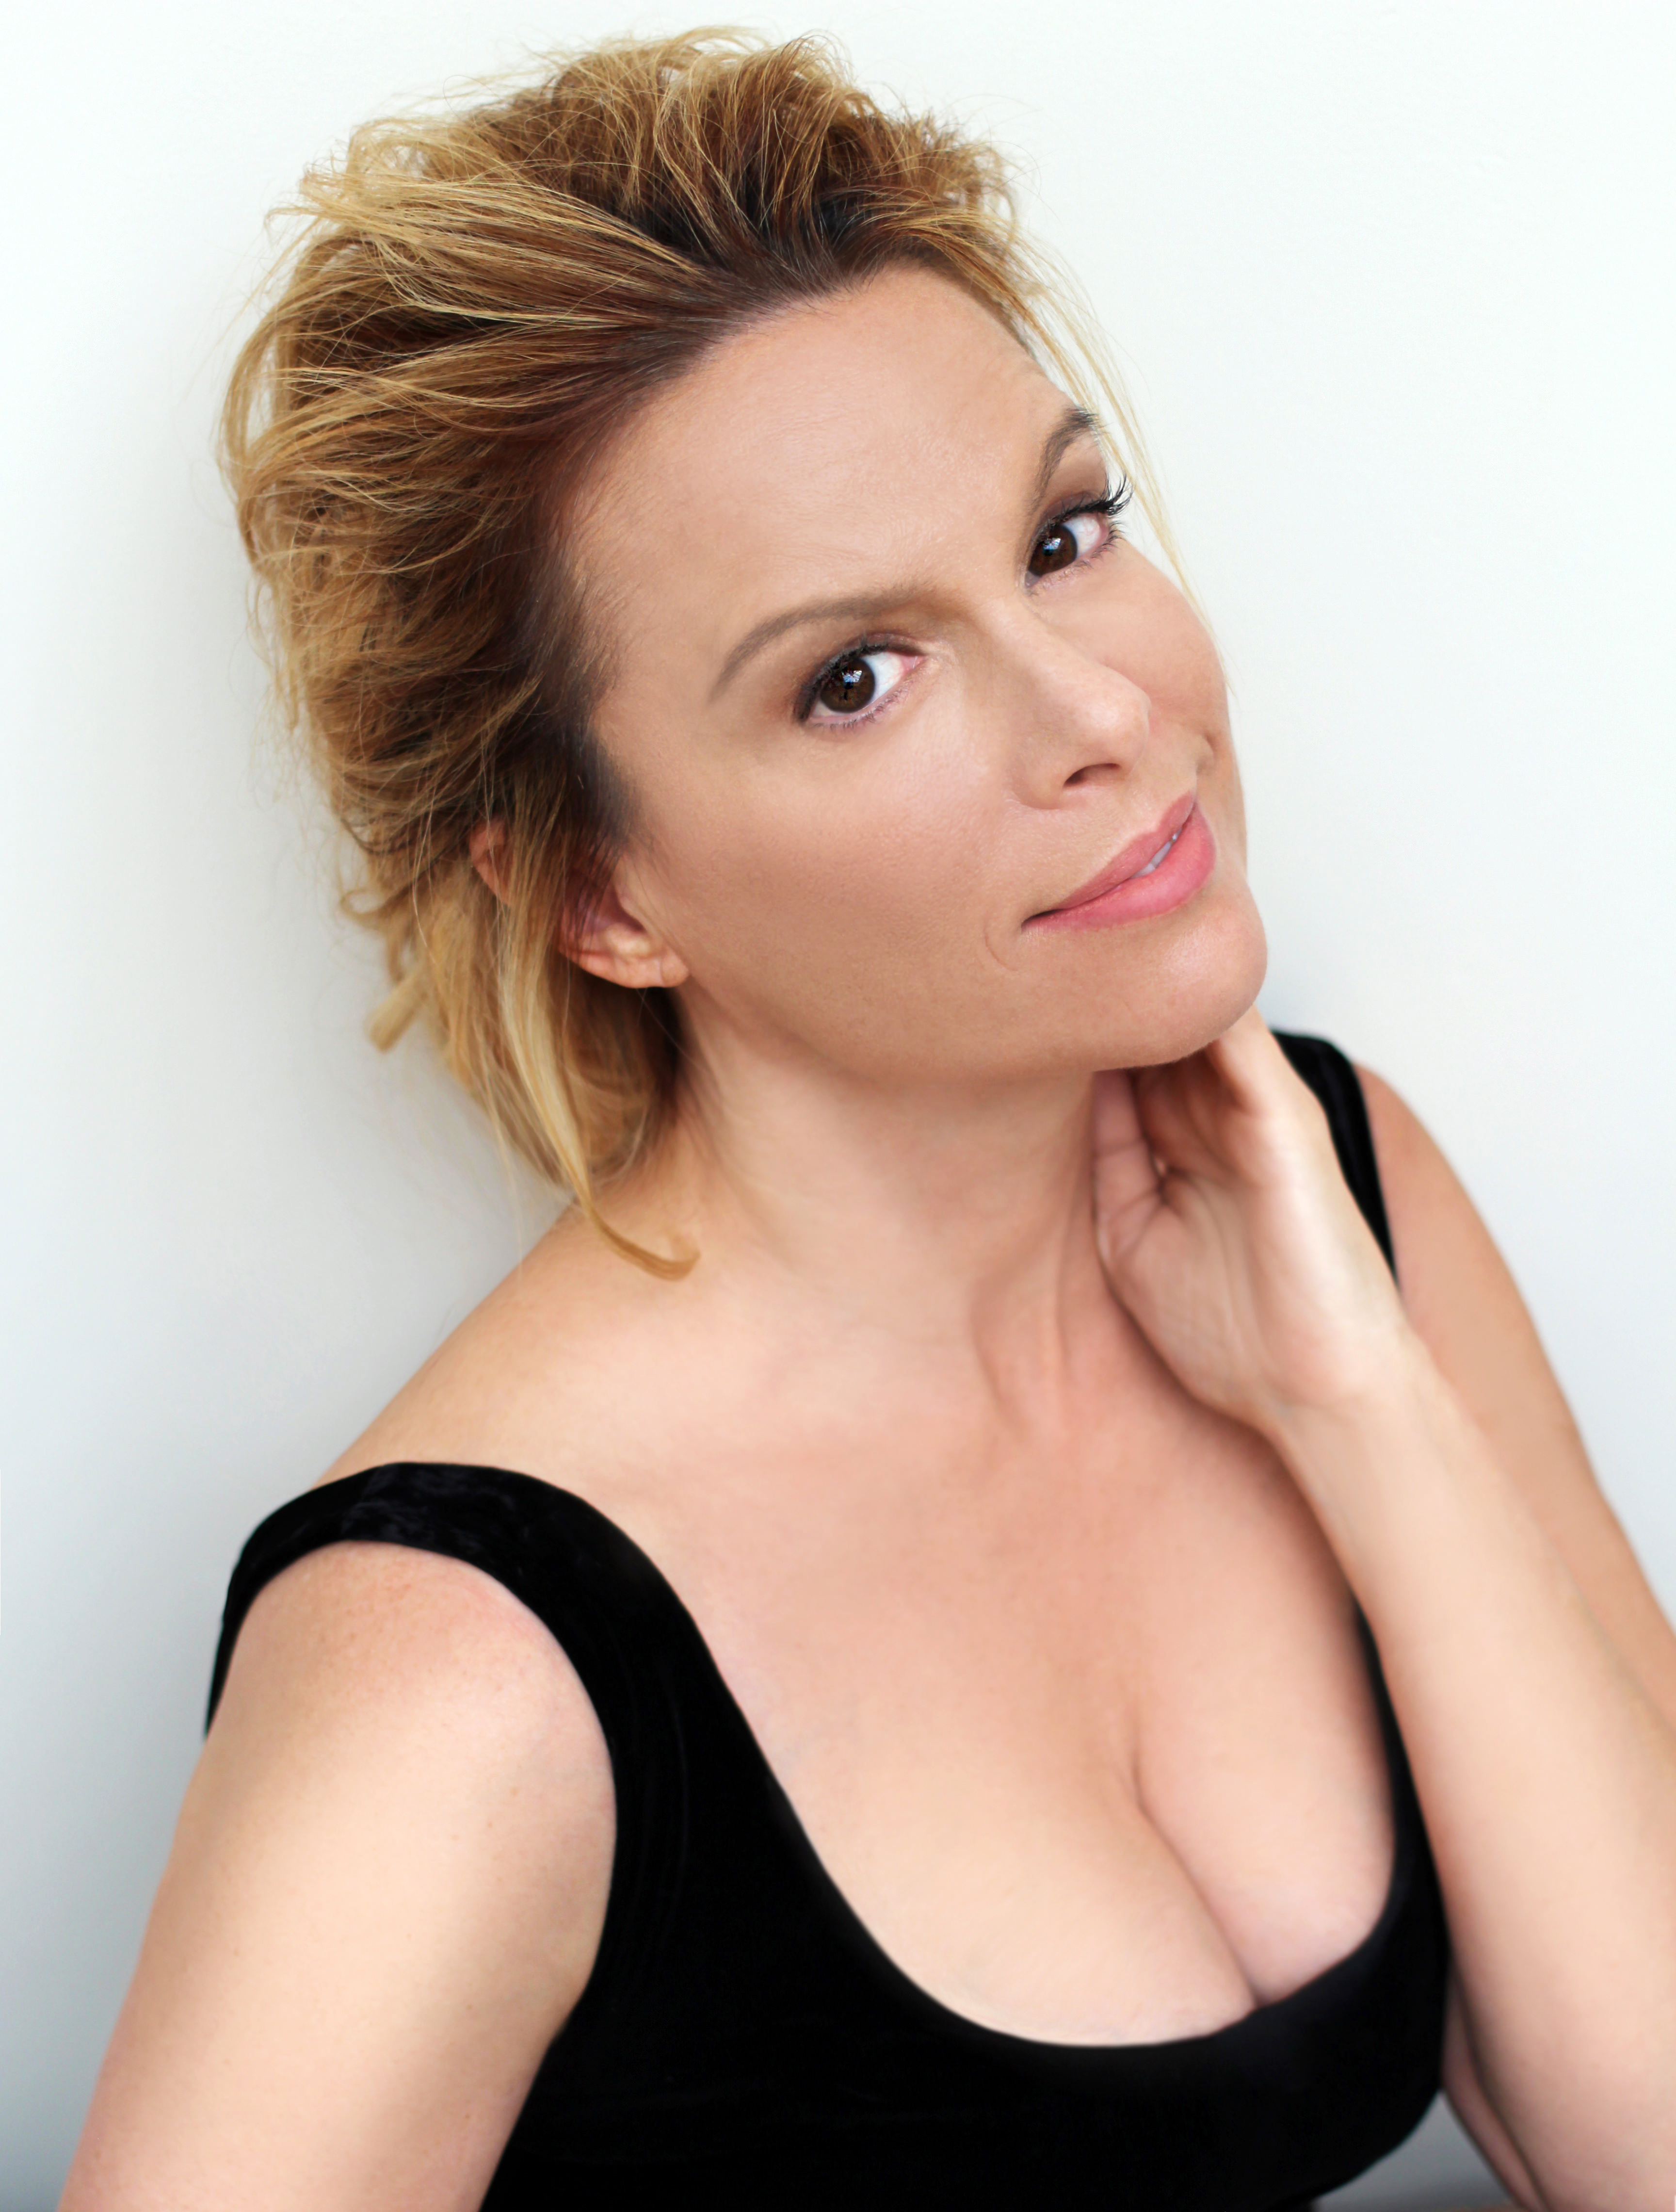 Chase masterson 2021